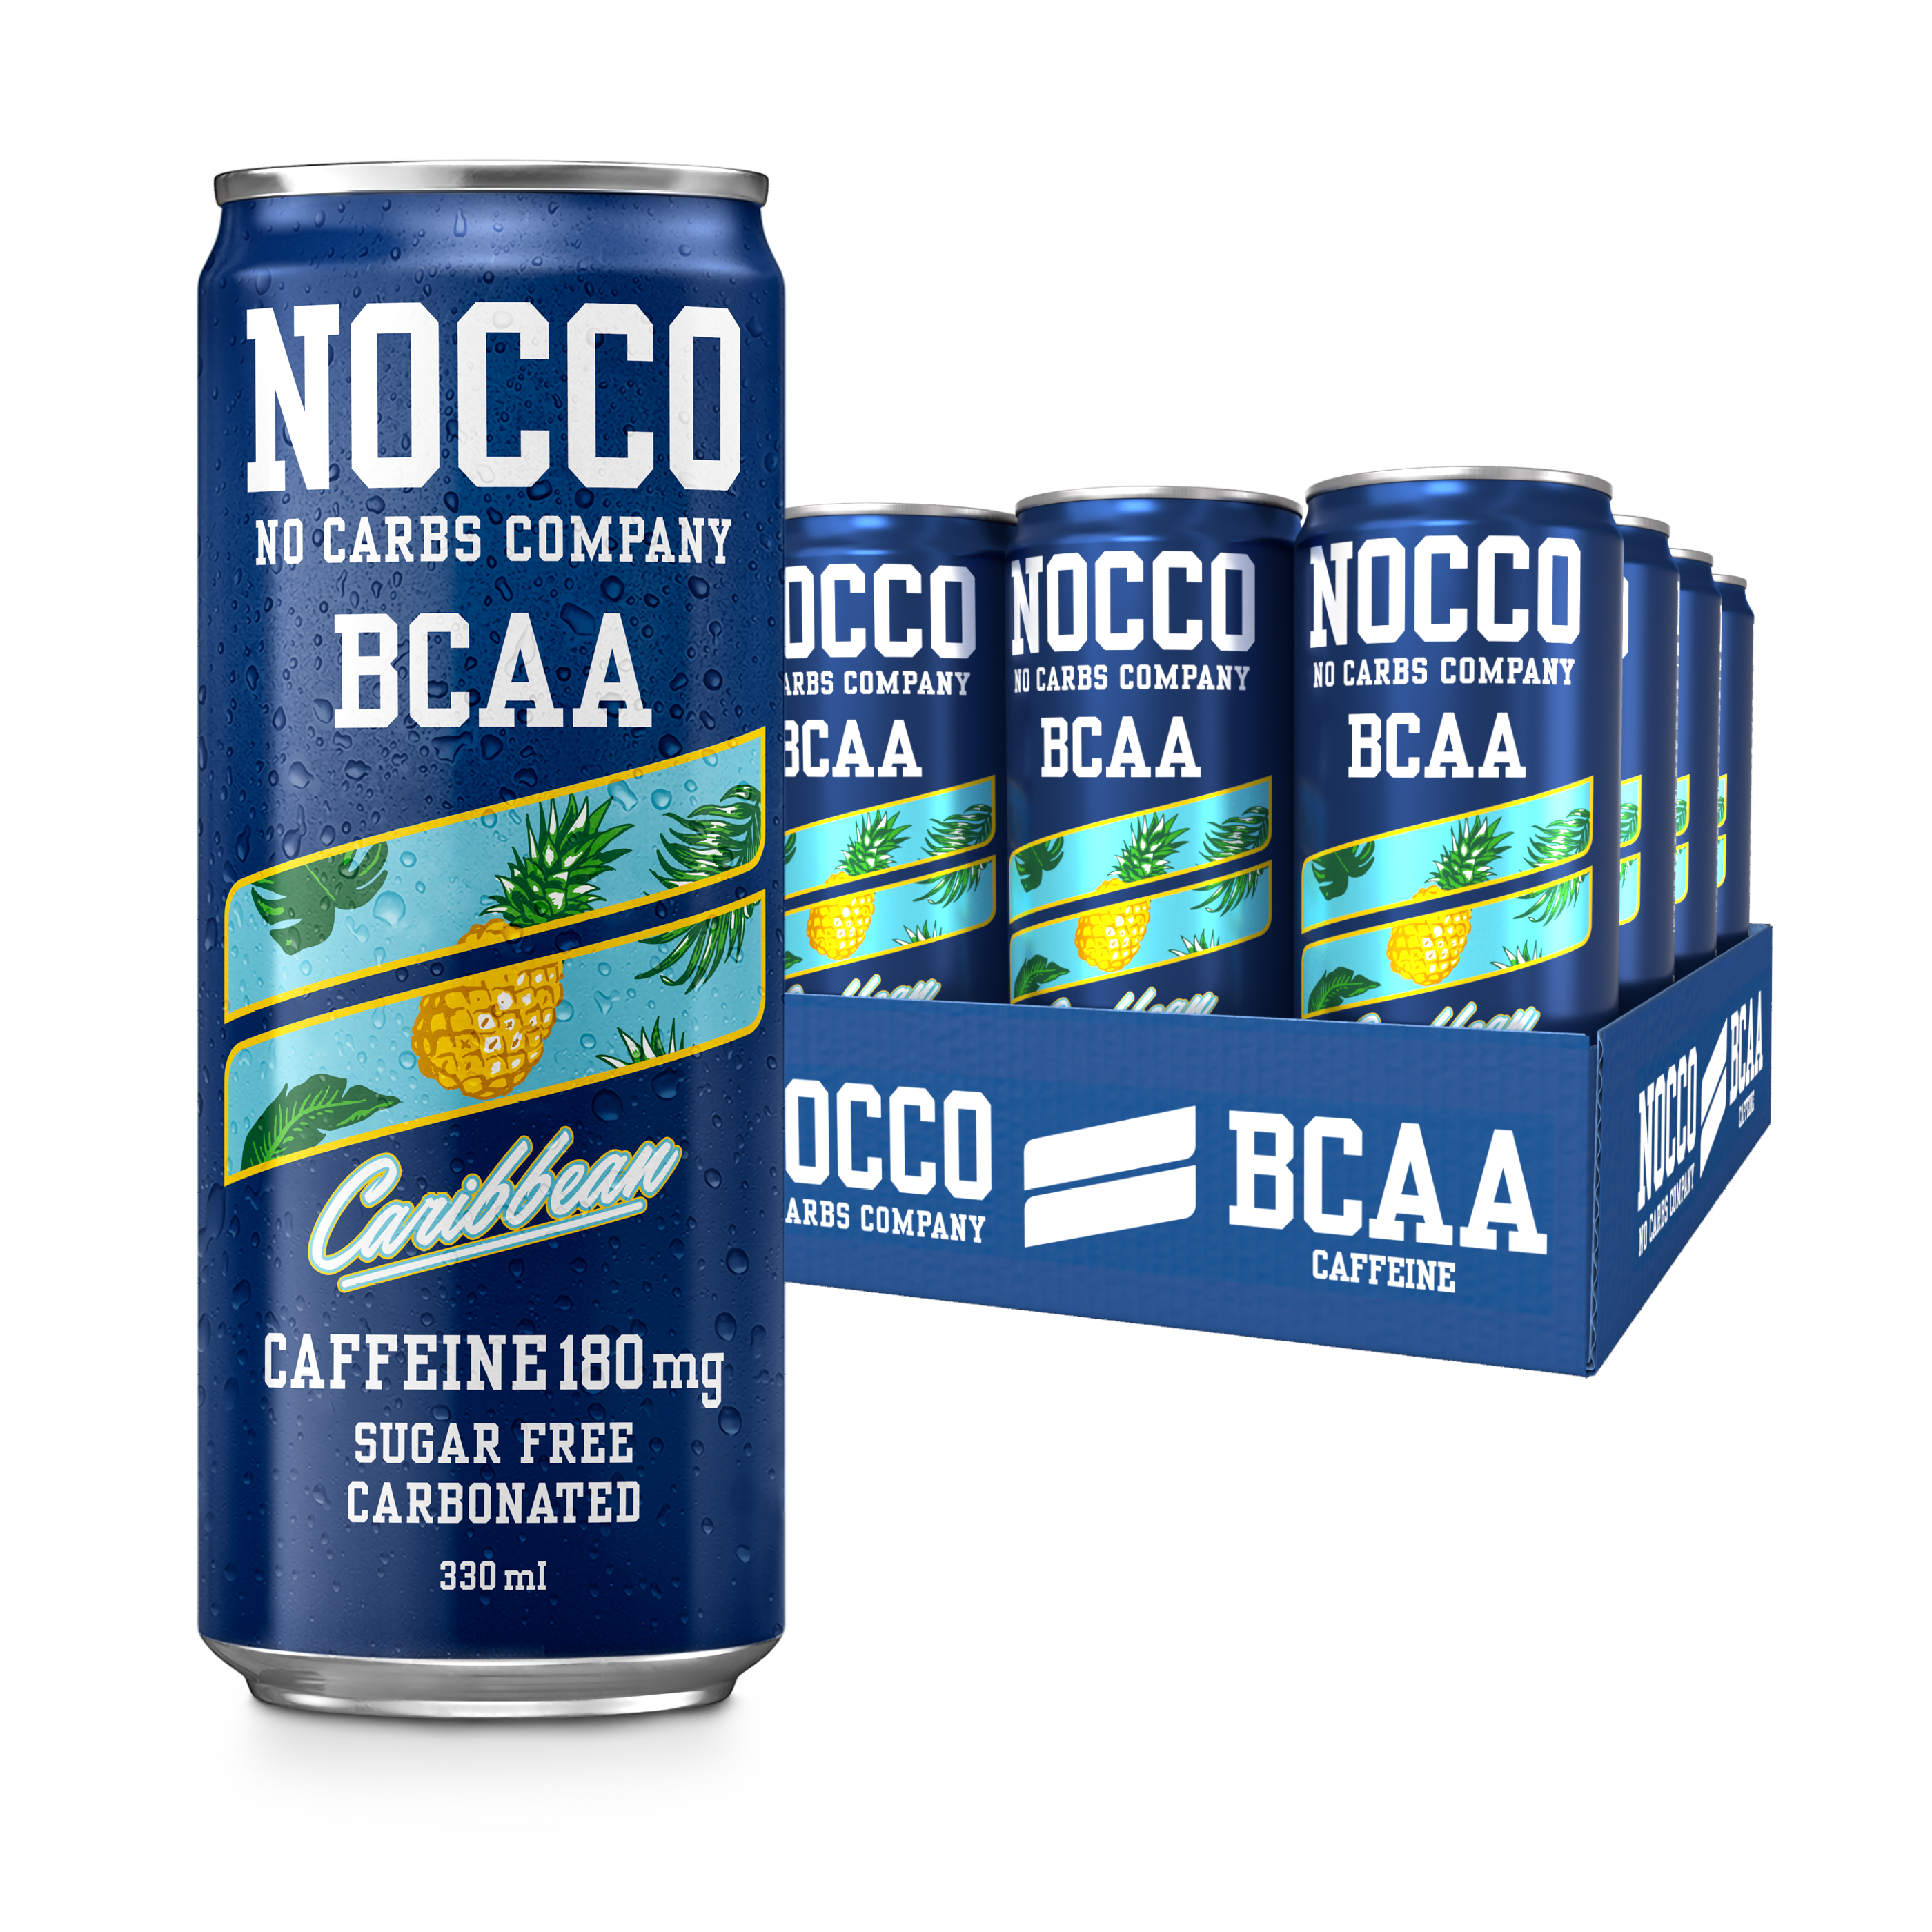 NOCCO Caribbean 12-pack